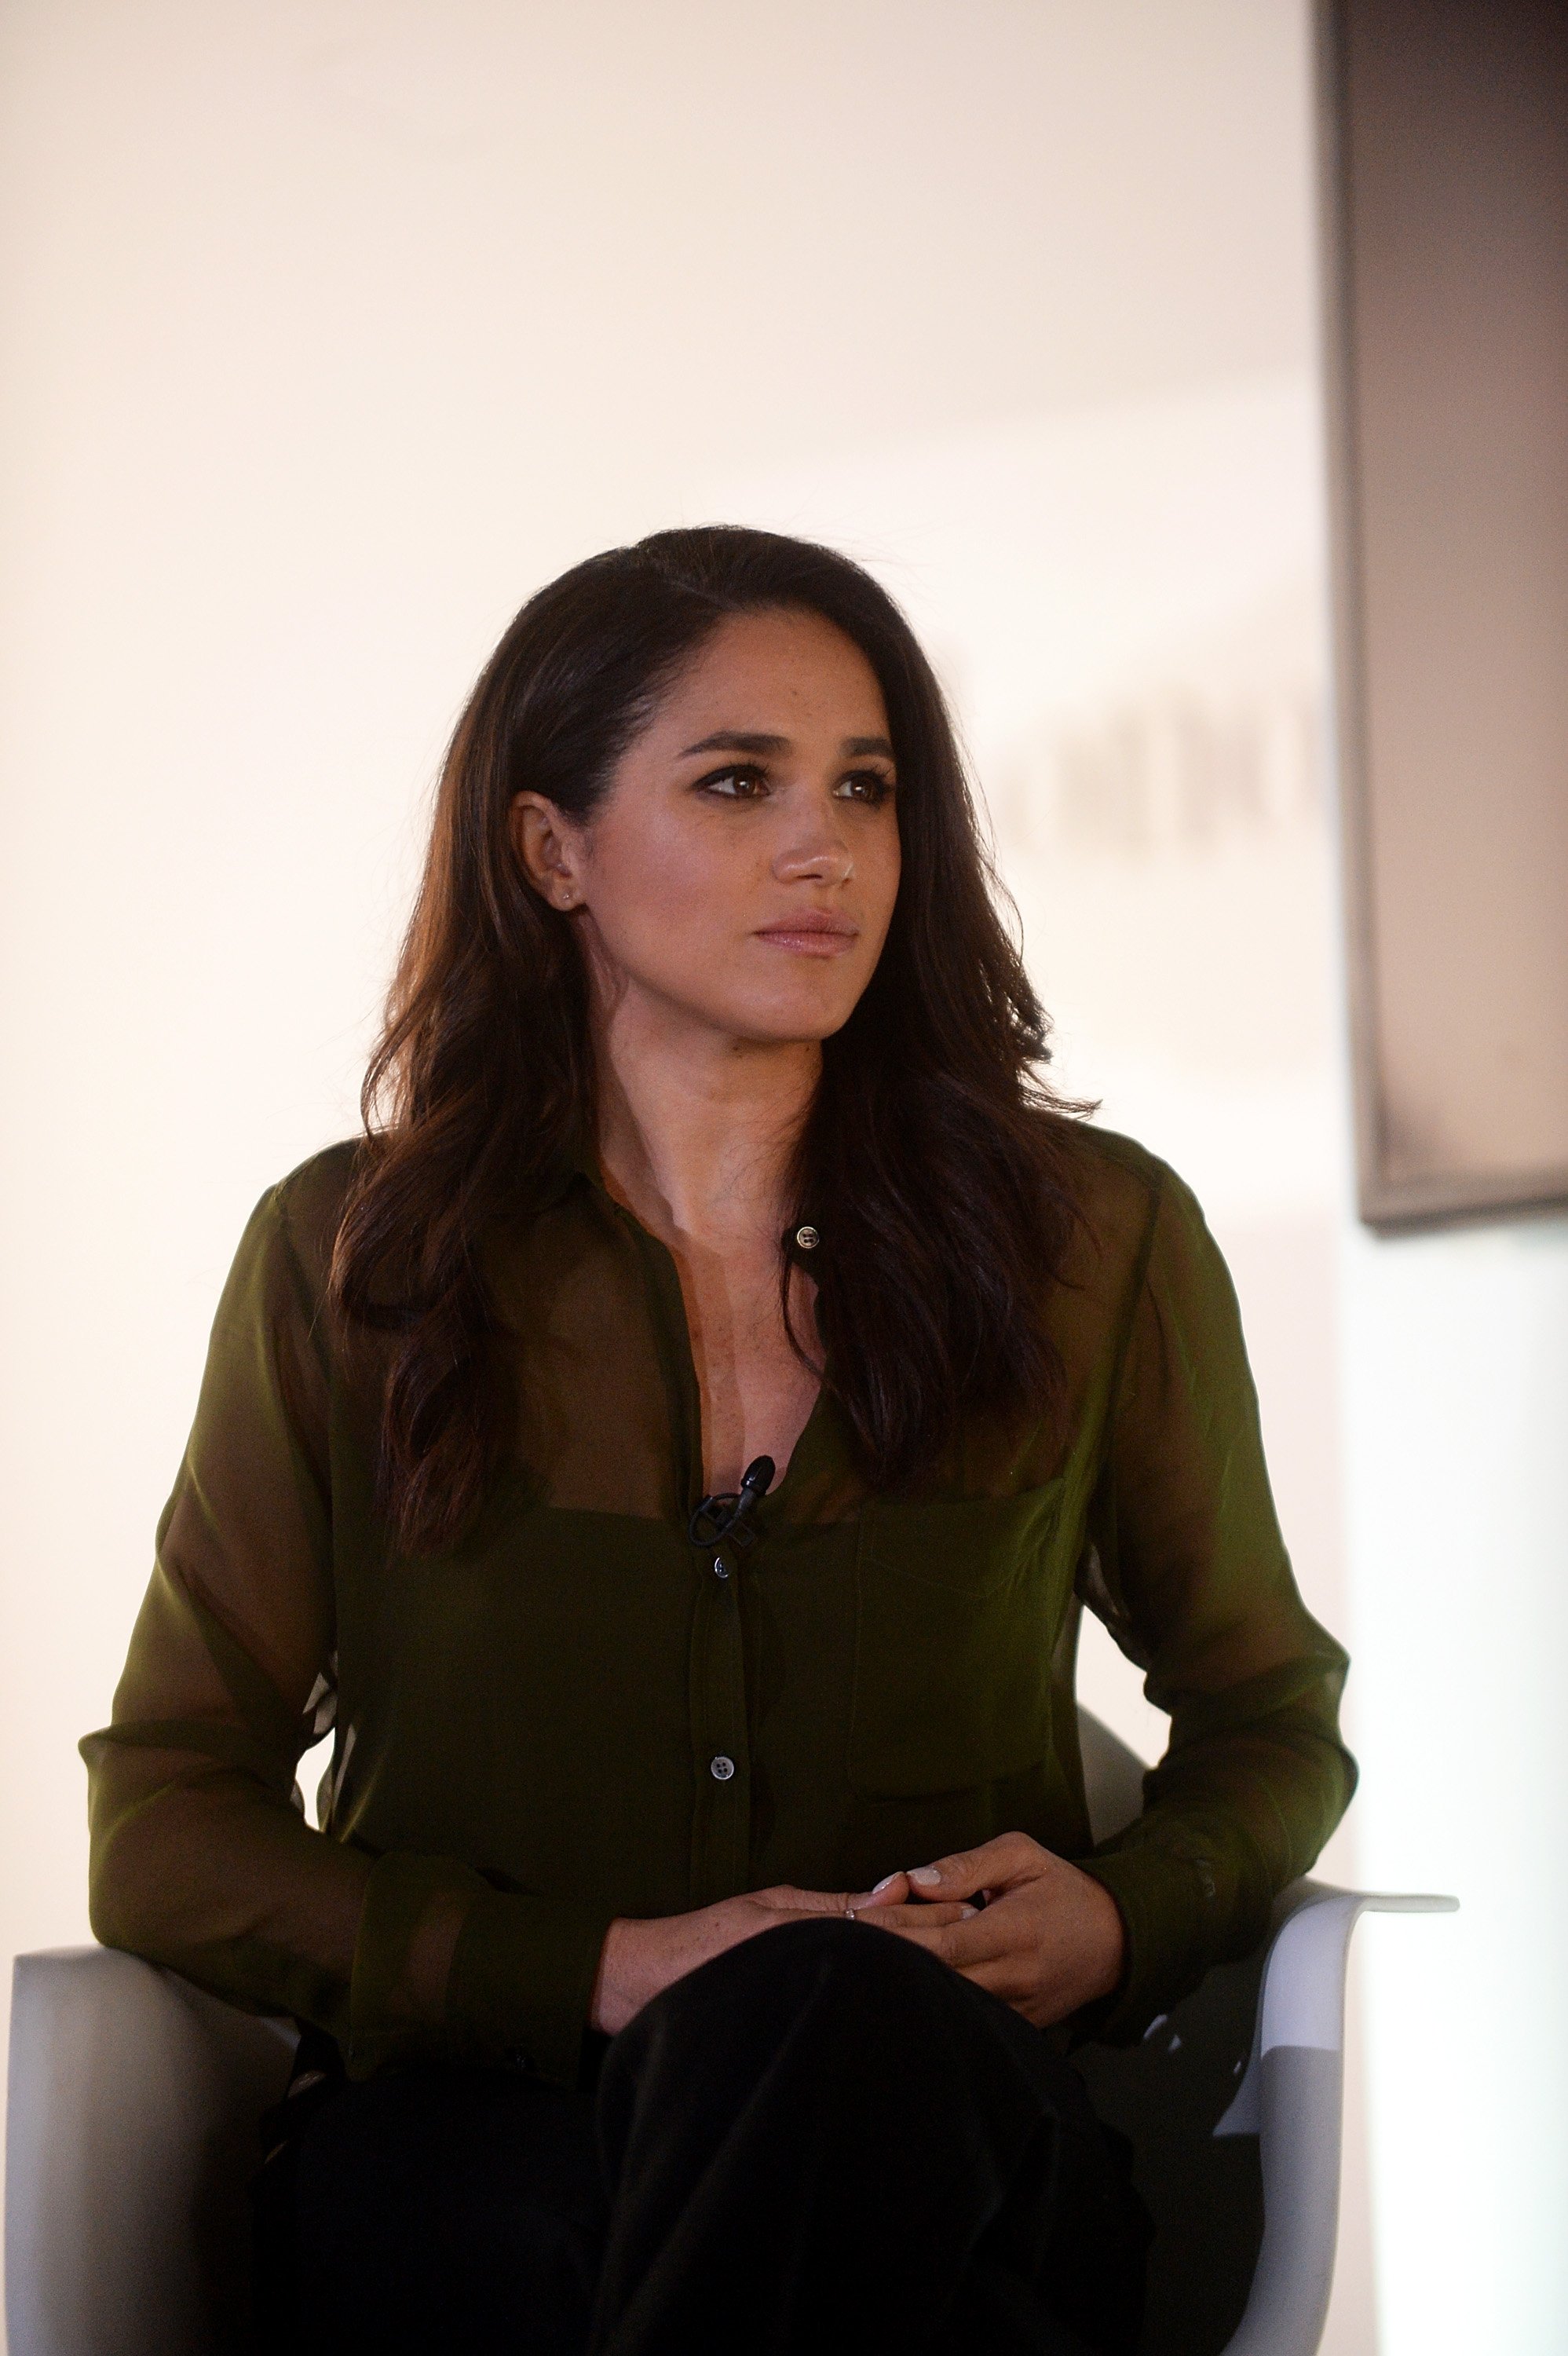 Meghan Markle attends REEBOK #HonorYourDays at Reebok Headquarters on April 28, 2016 in Canton, Massachusetts | Photo: Getty Images